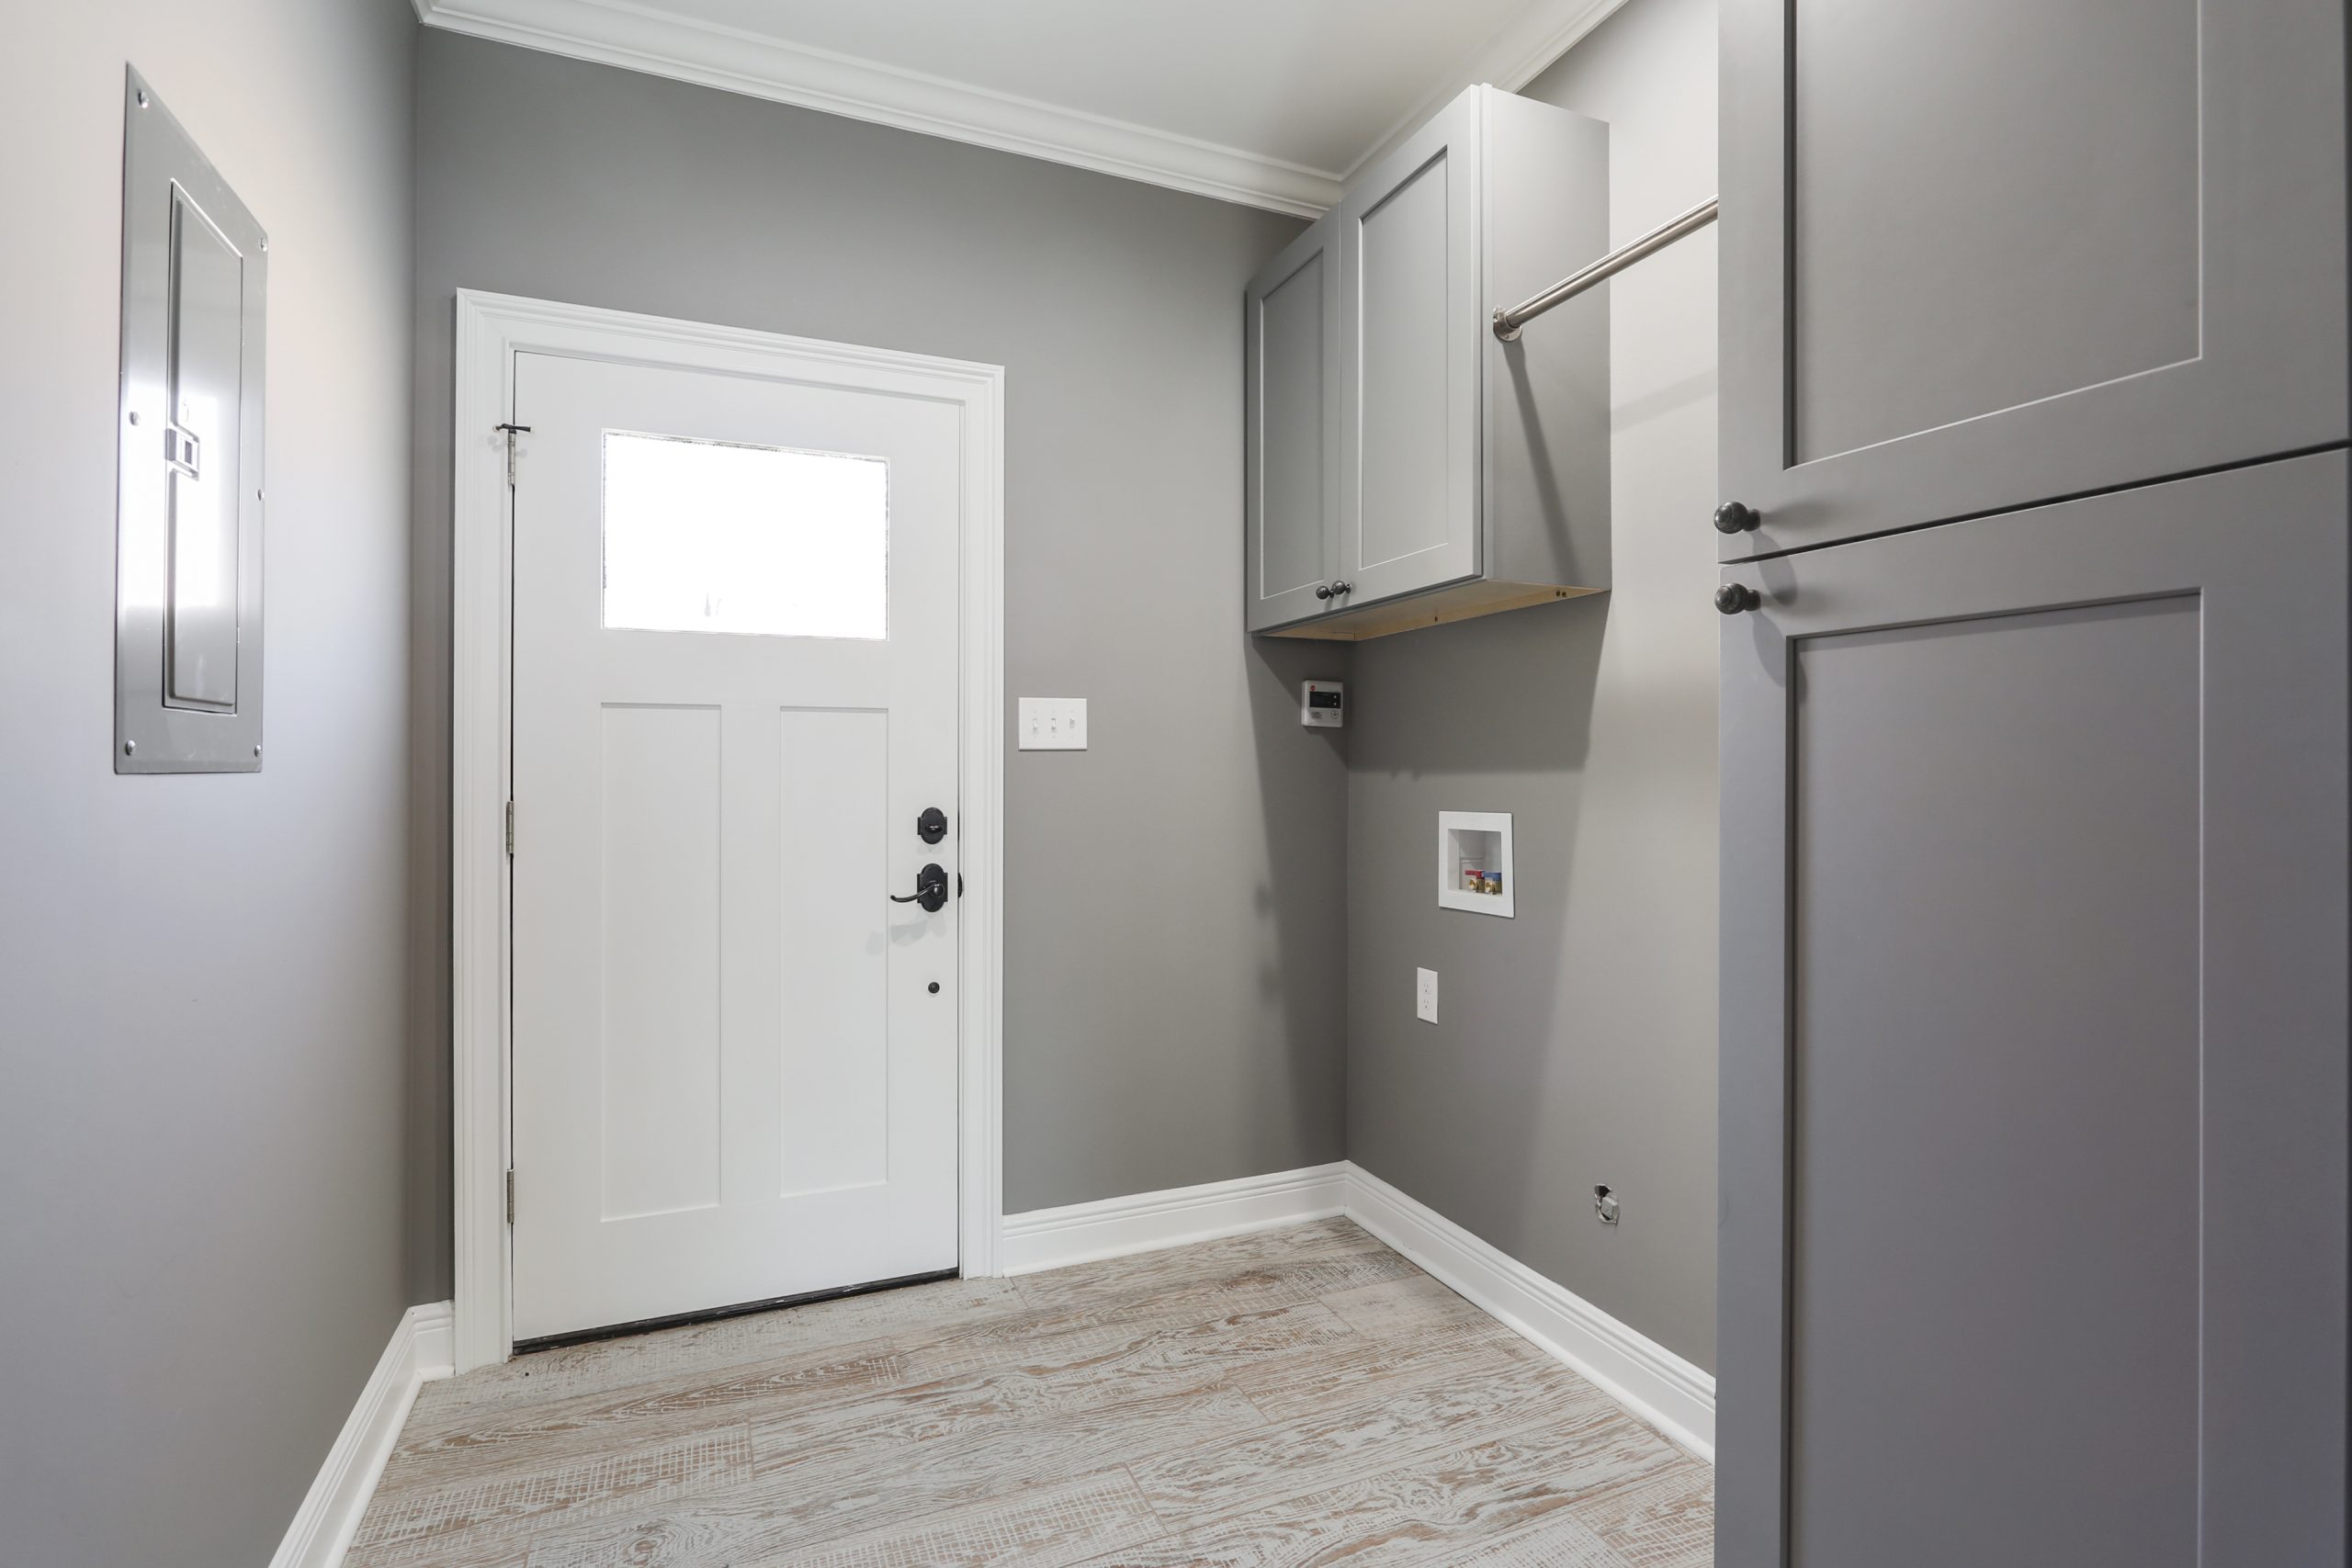 Athania House Laundry Room Renovation designed and built by DMG Design+Build